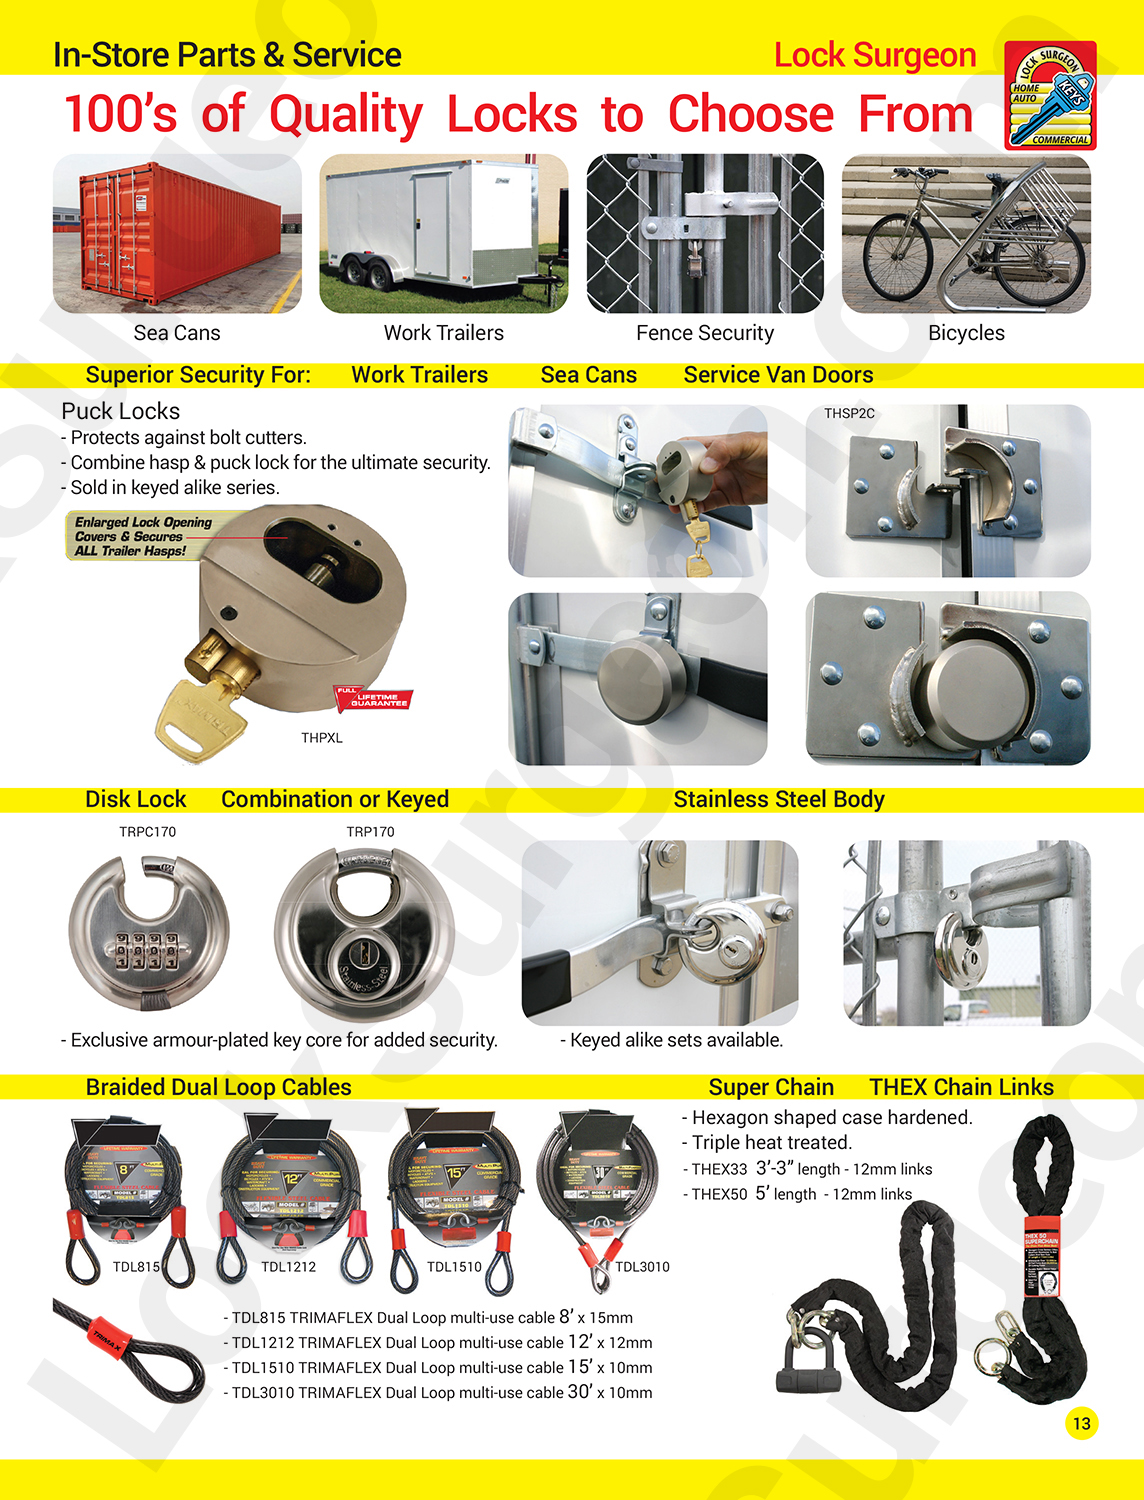 Superior security locks for Sea Cans Work Trailers Fences and equipment.